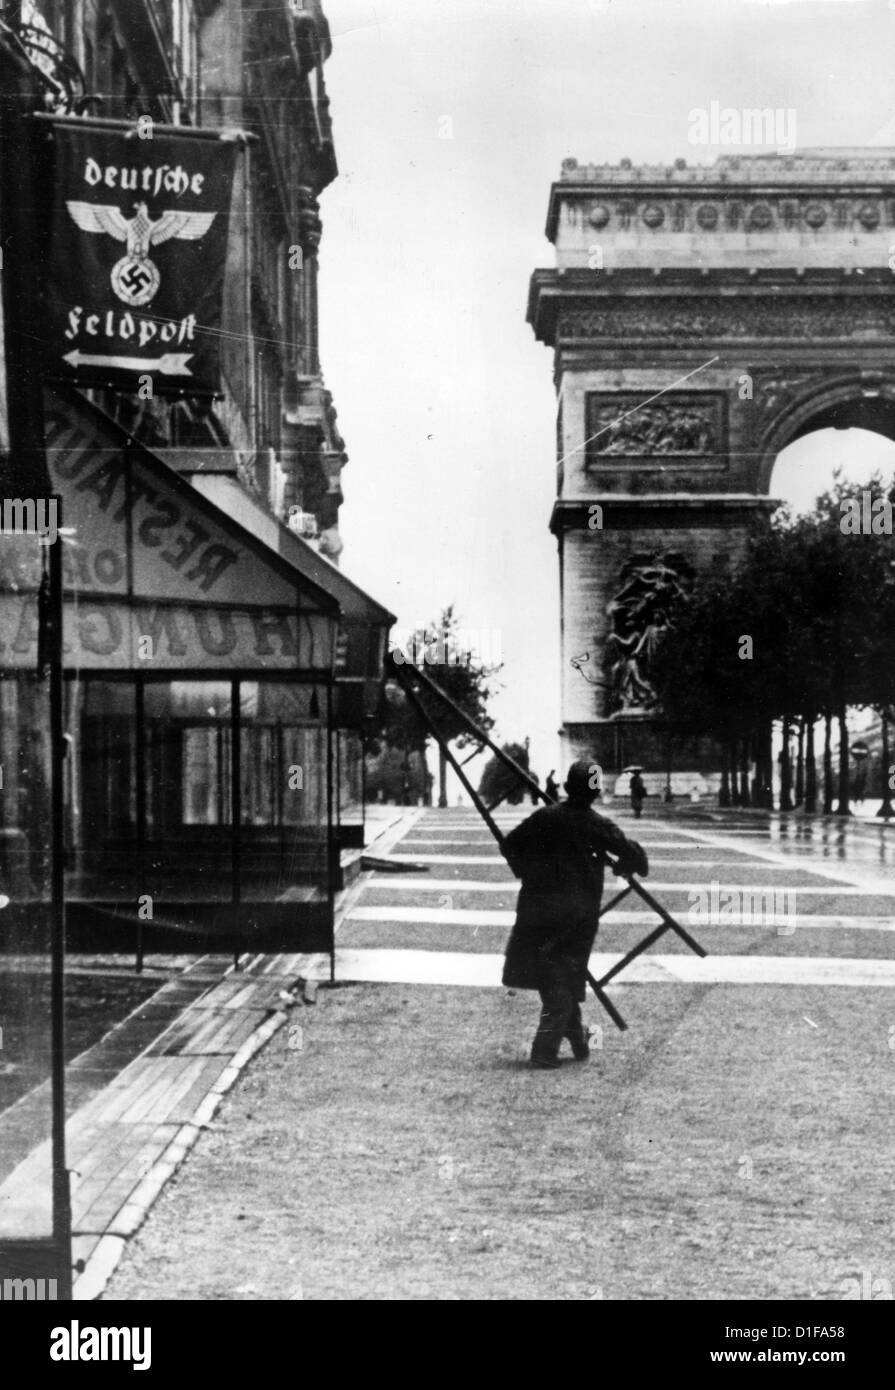 A flag with a swastika and German federal eagle marks the entrance of the German army post office near the Arc de Triomphe in Paris, France, in July 1940. Fotoarchiv für Zeitgeschichte Stock Photo